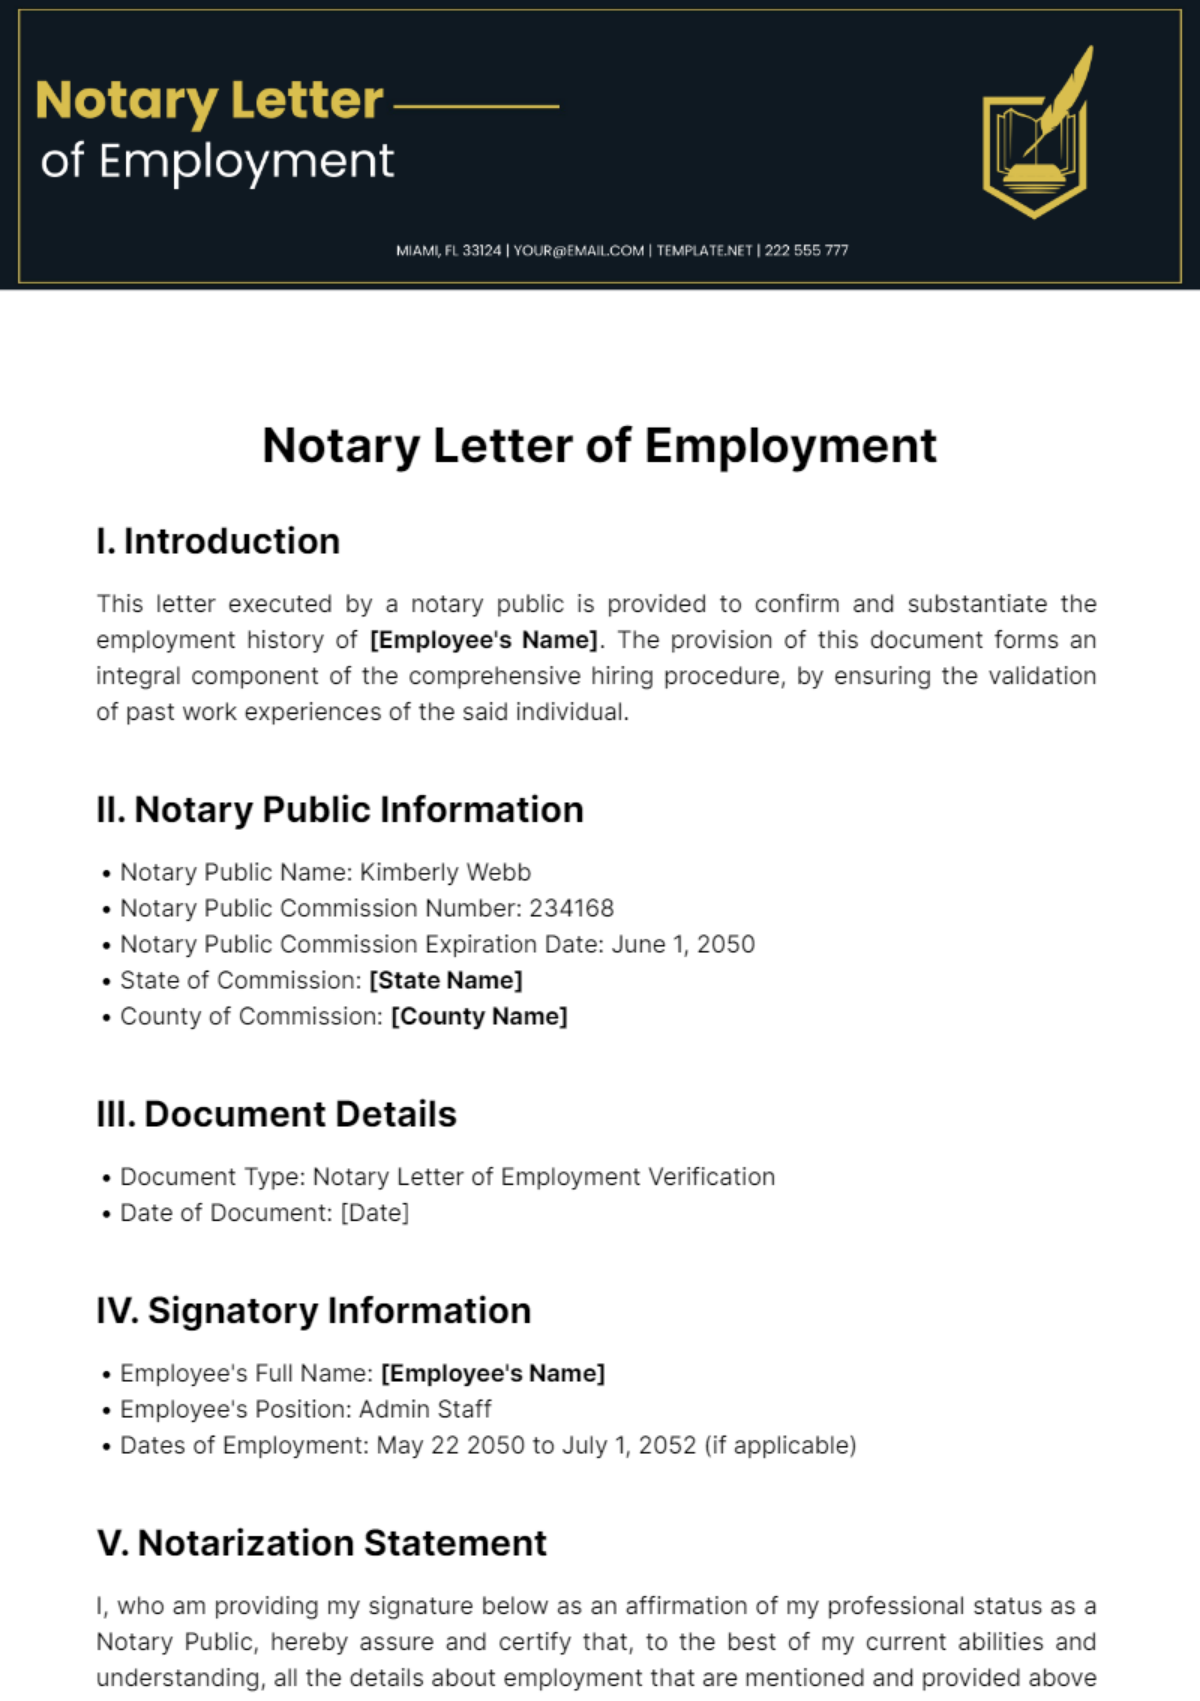 Notary Letter of Employment Template